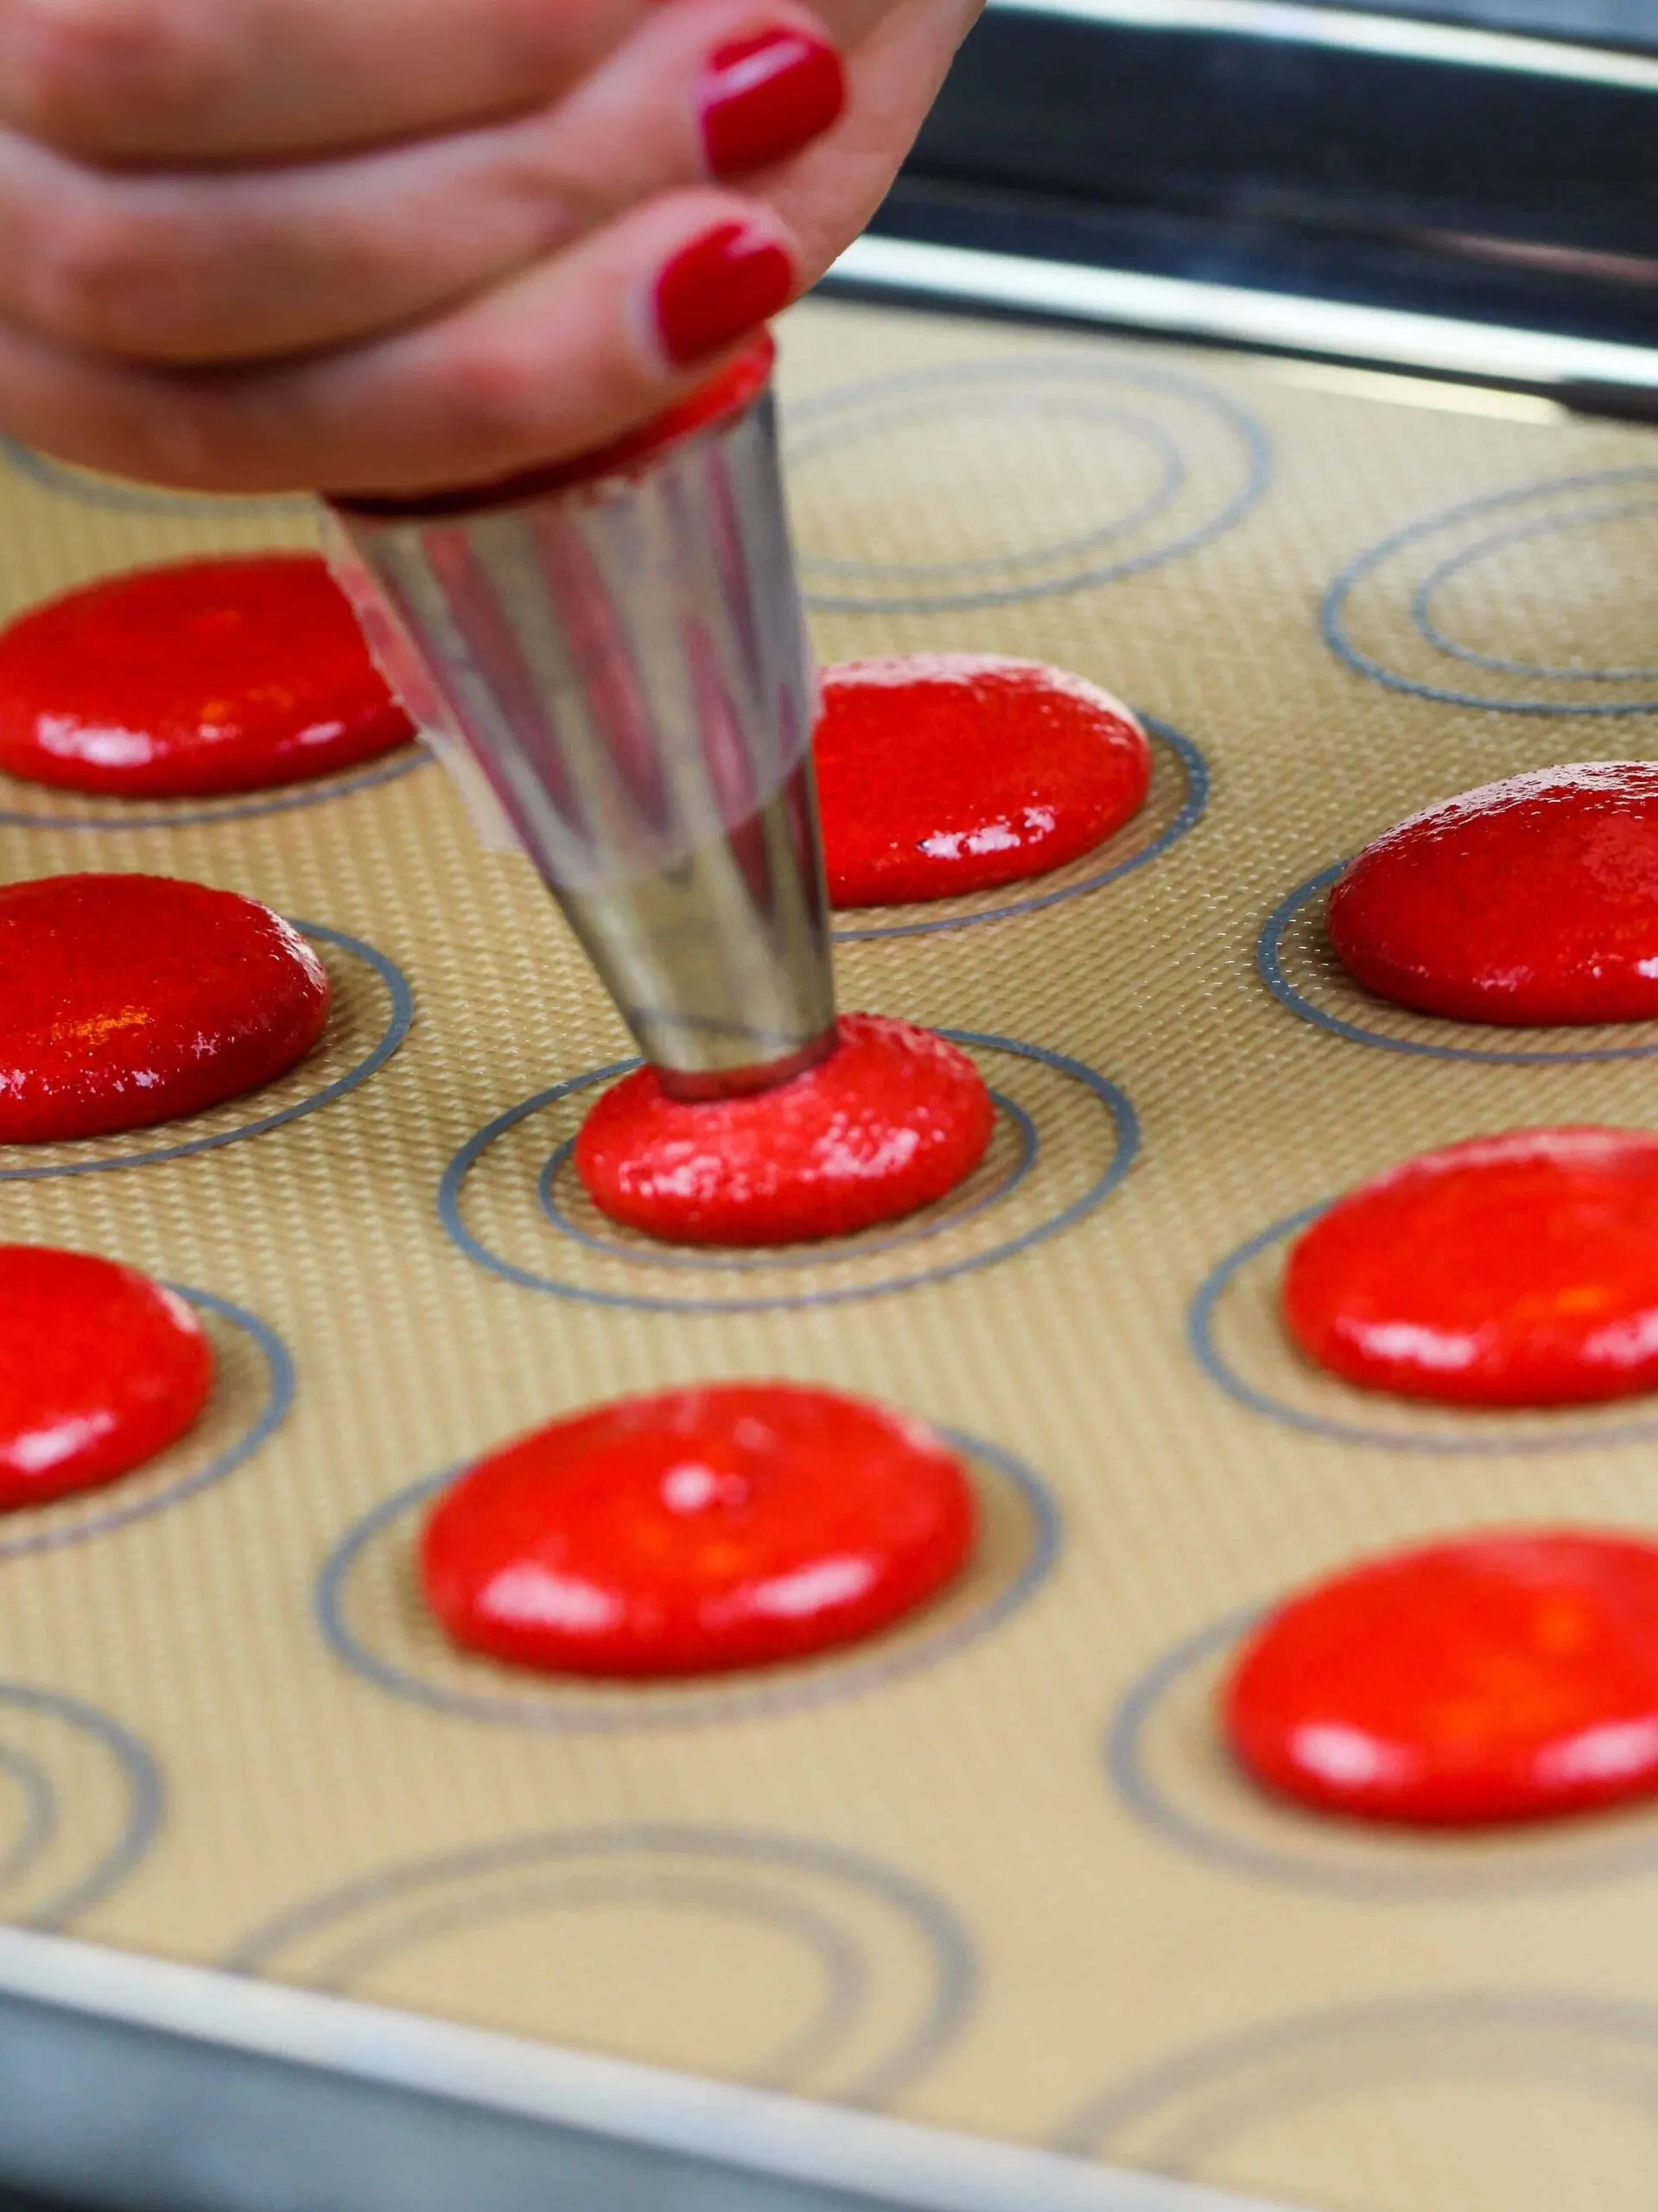 image of french red velvet macaron batter being piped onto a silpat mat